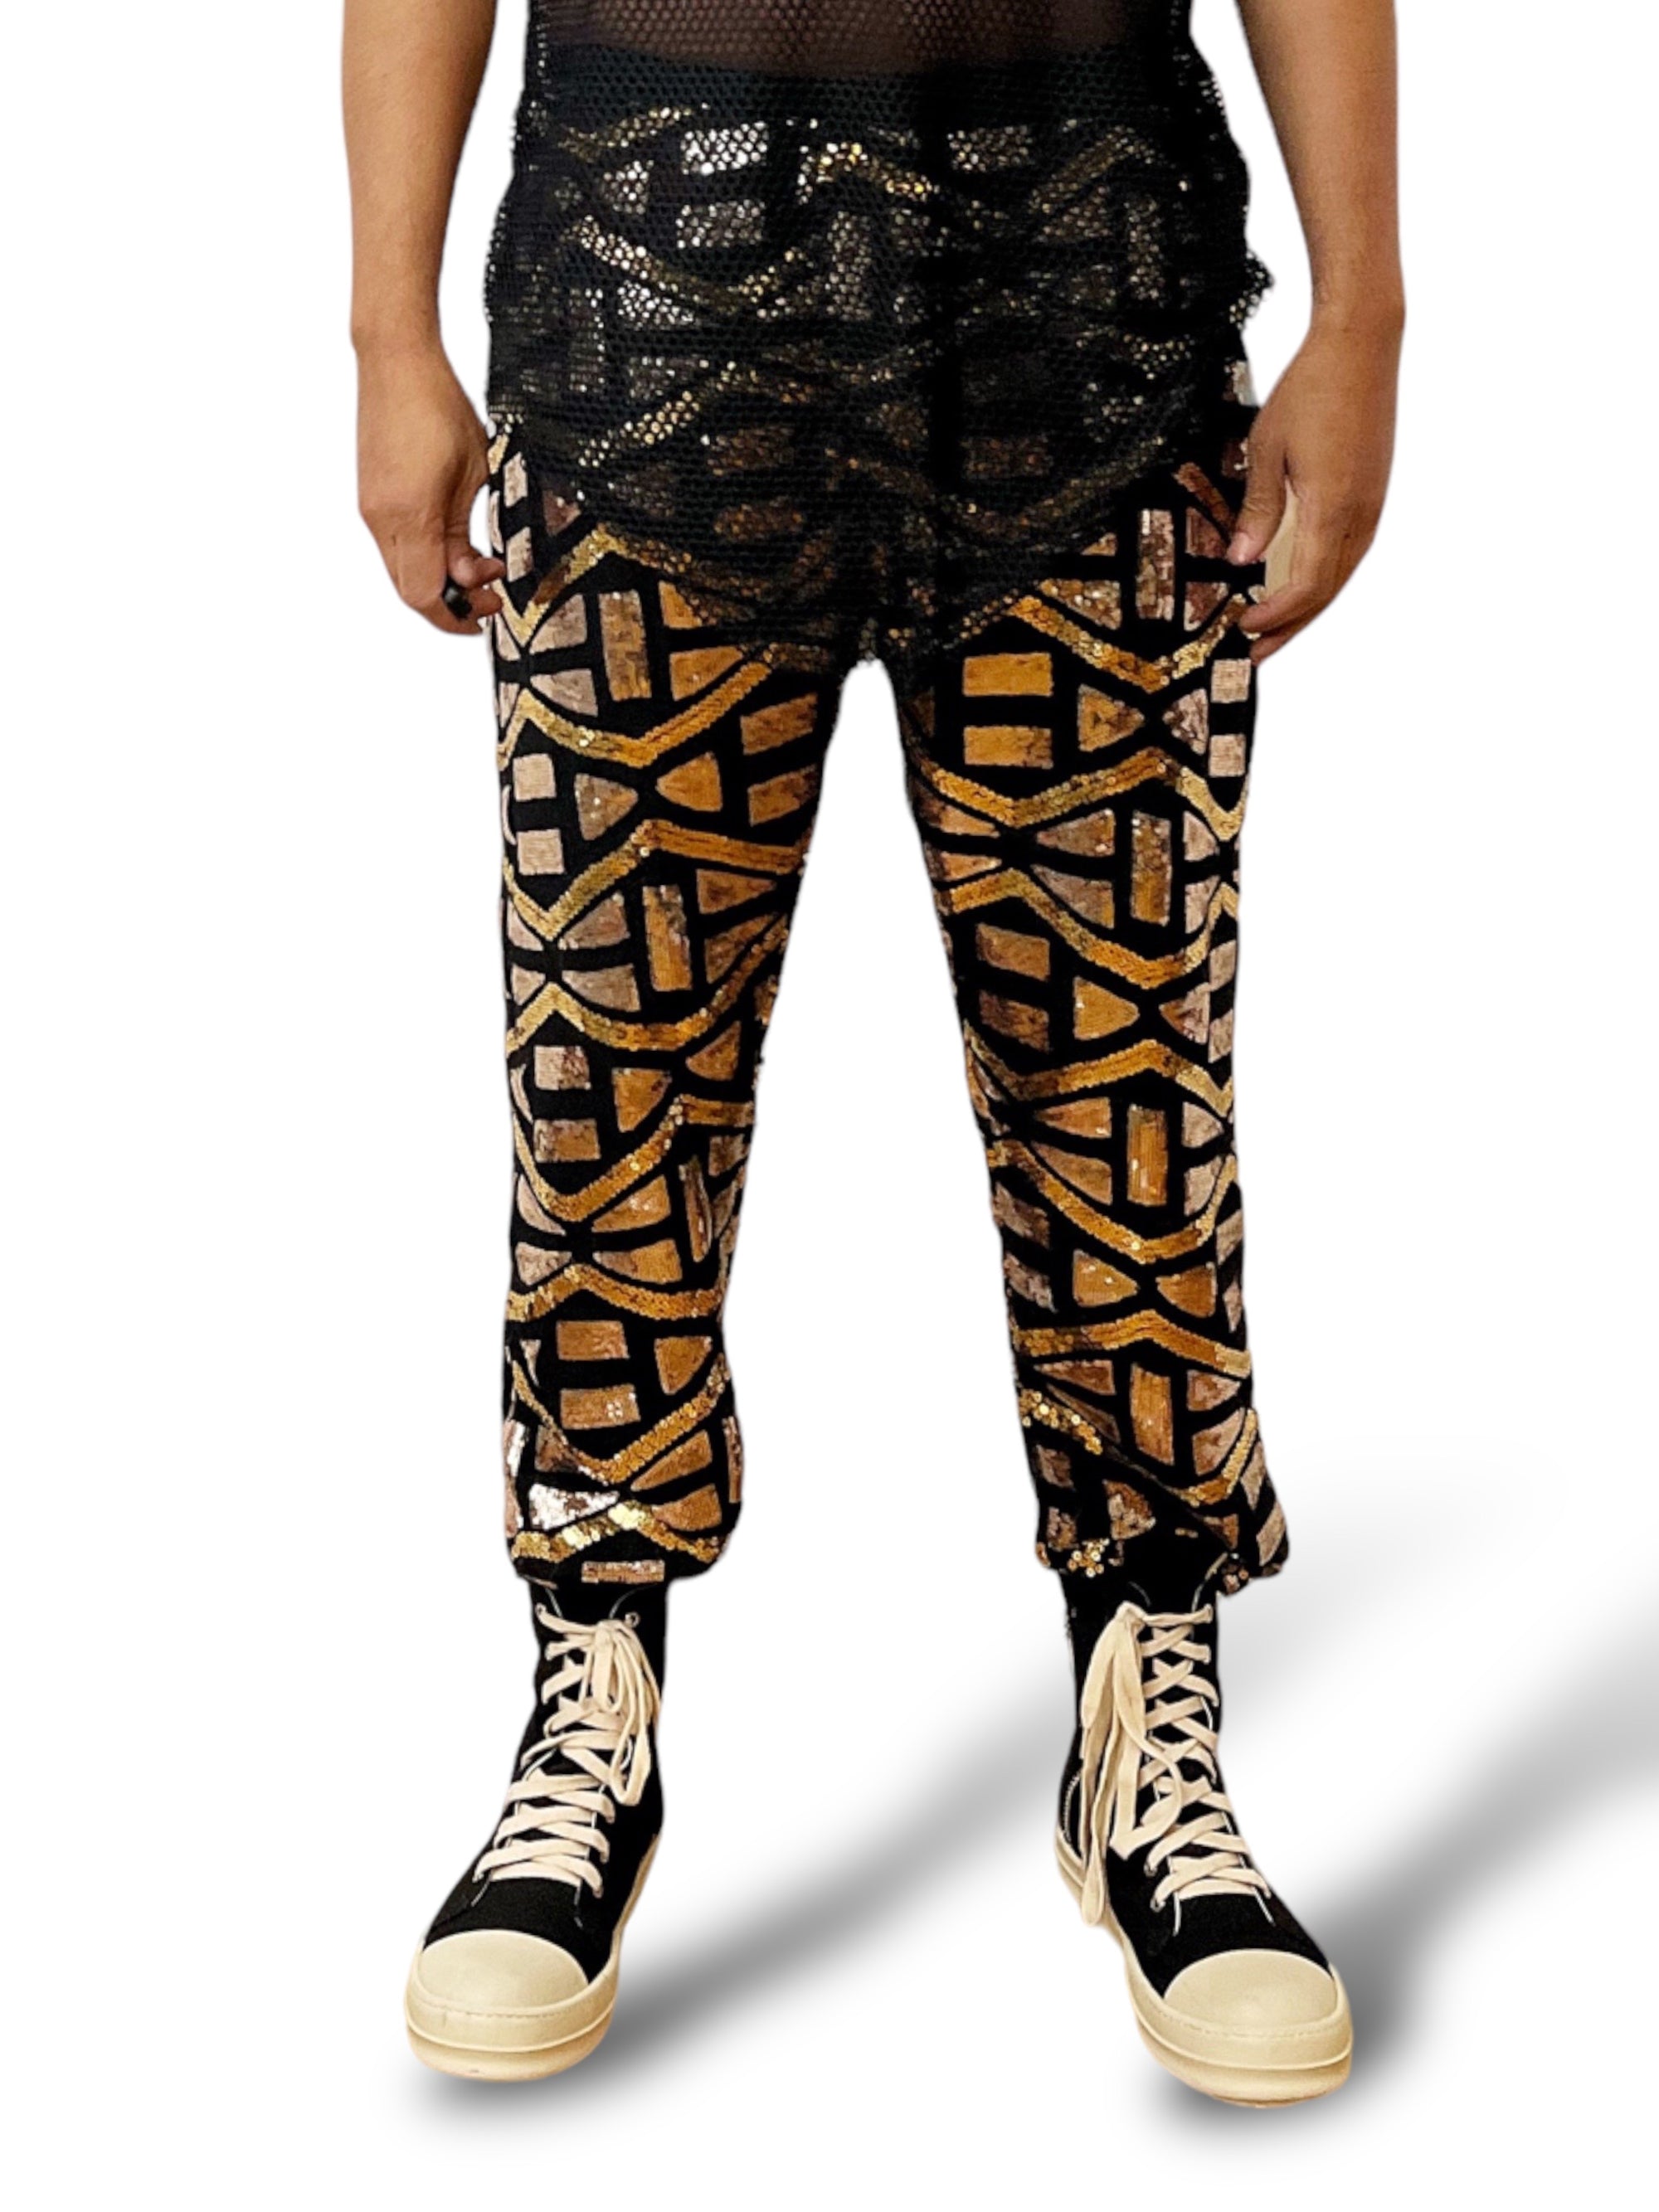 Symbol Aztec Tribal Sequins Jogger Pant Sequin Patterned Mesh Lined Two Tone Gold And Festival Trouser Pants Unisex - Who Cares Why Not